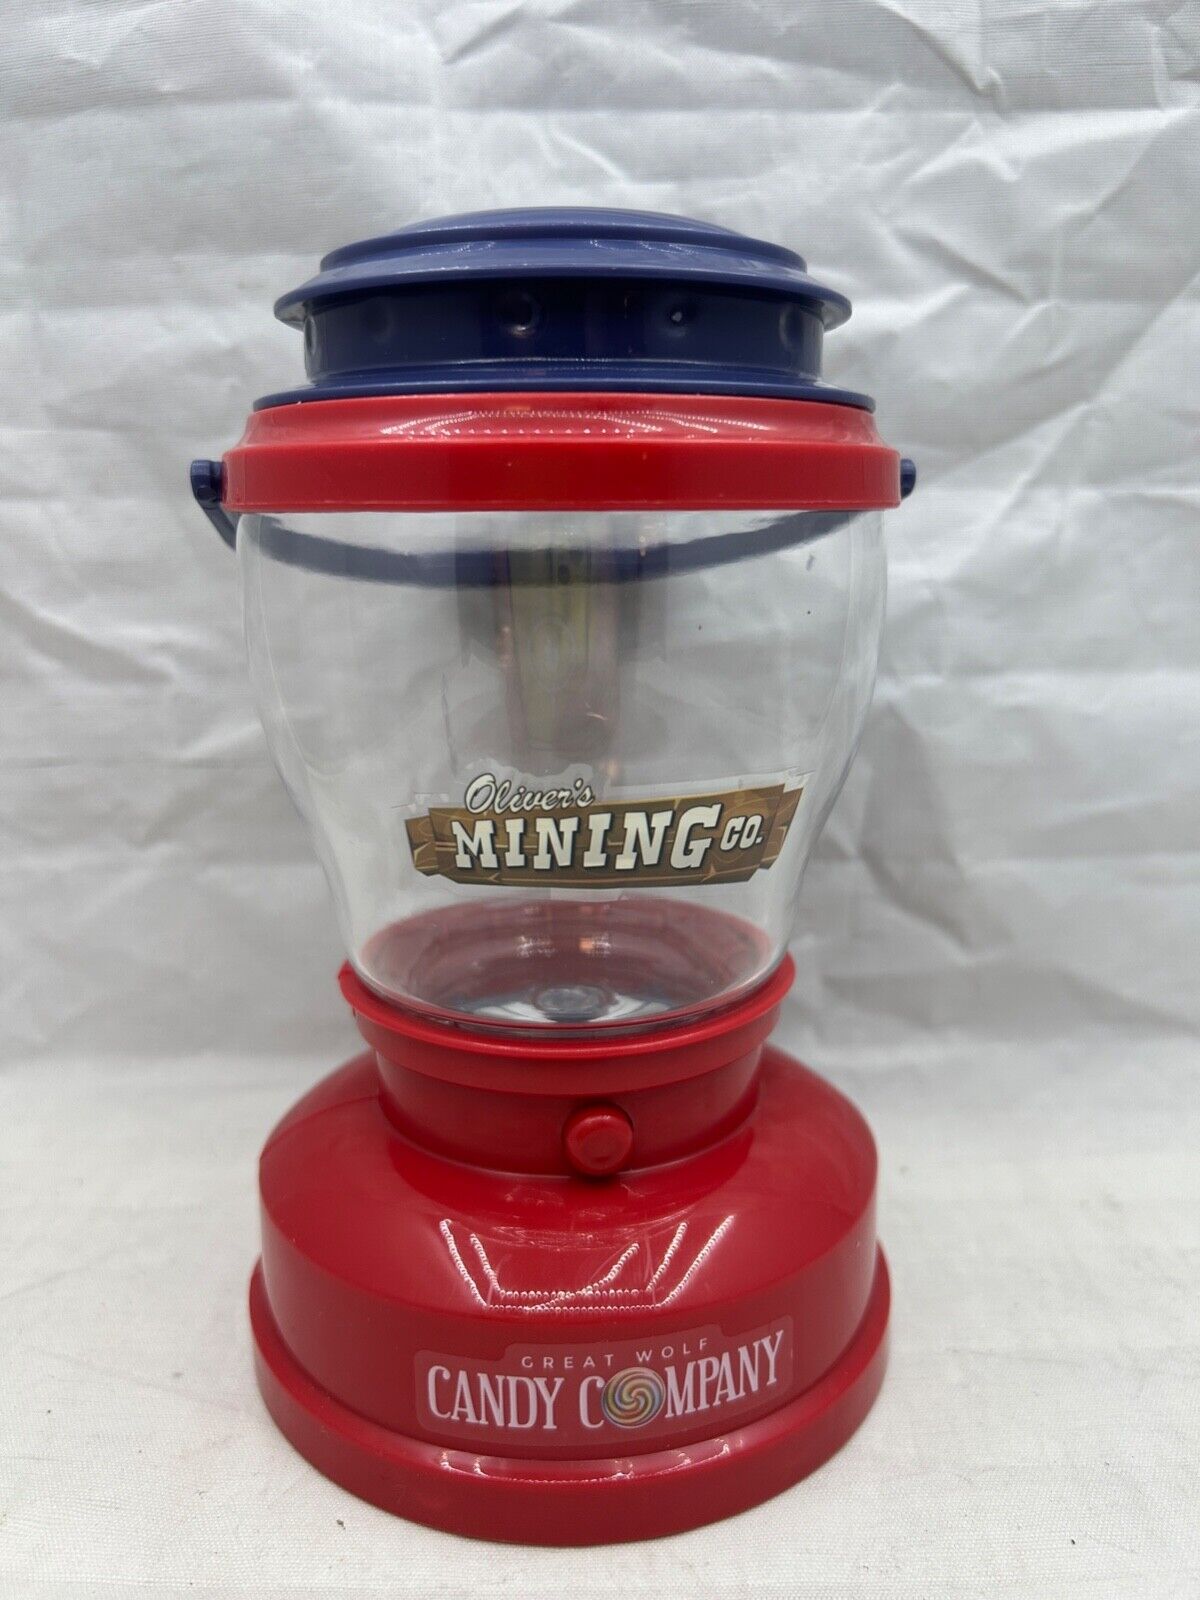 Case of 24 Oliver\'s Mining Co Great Wolf Lodge Lighted Candy Lantern Red Blue